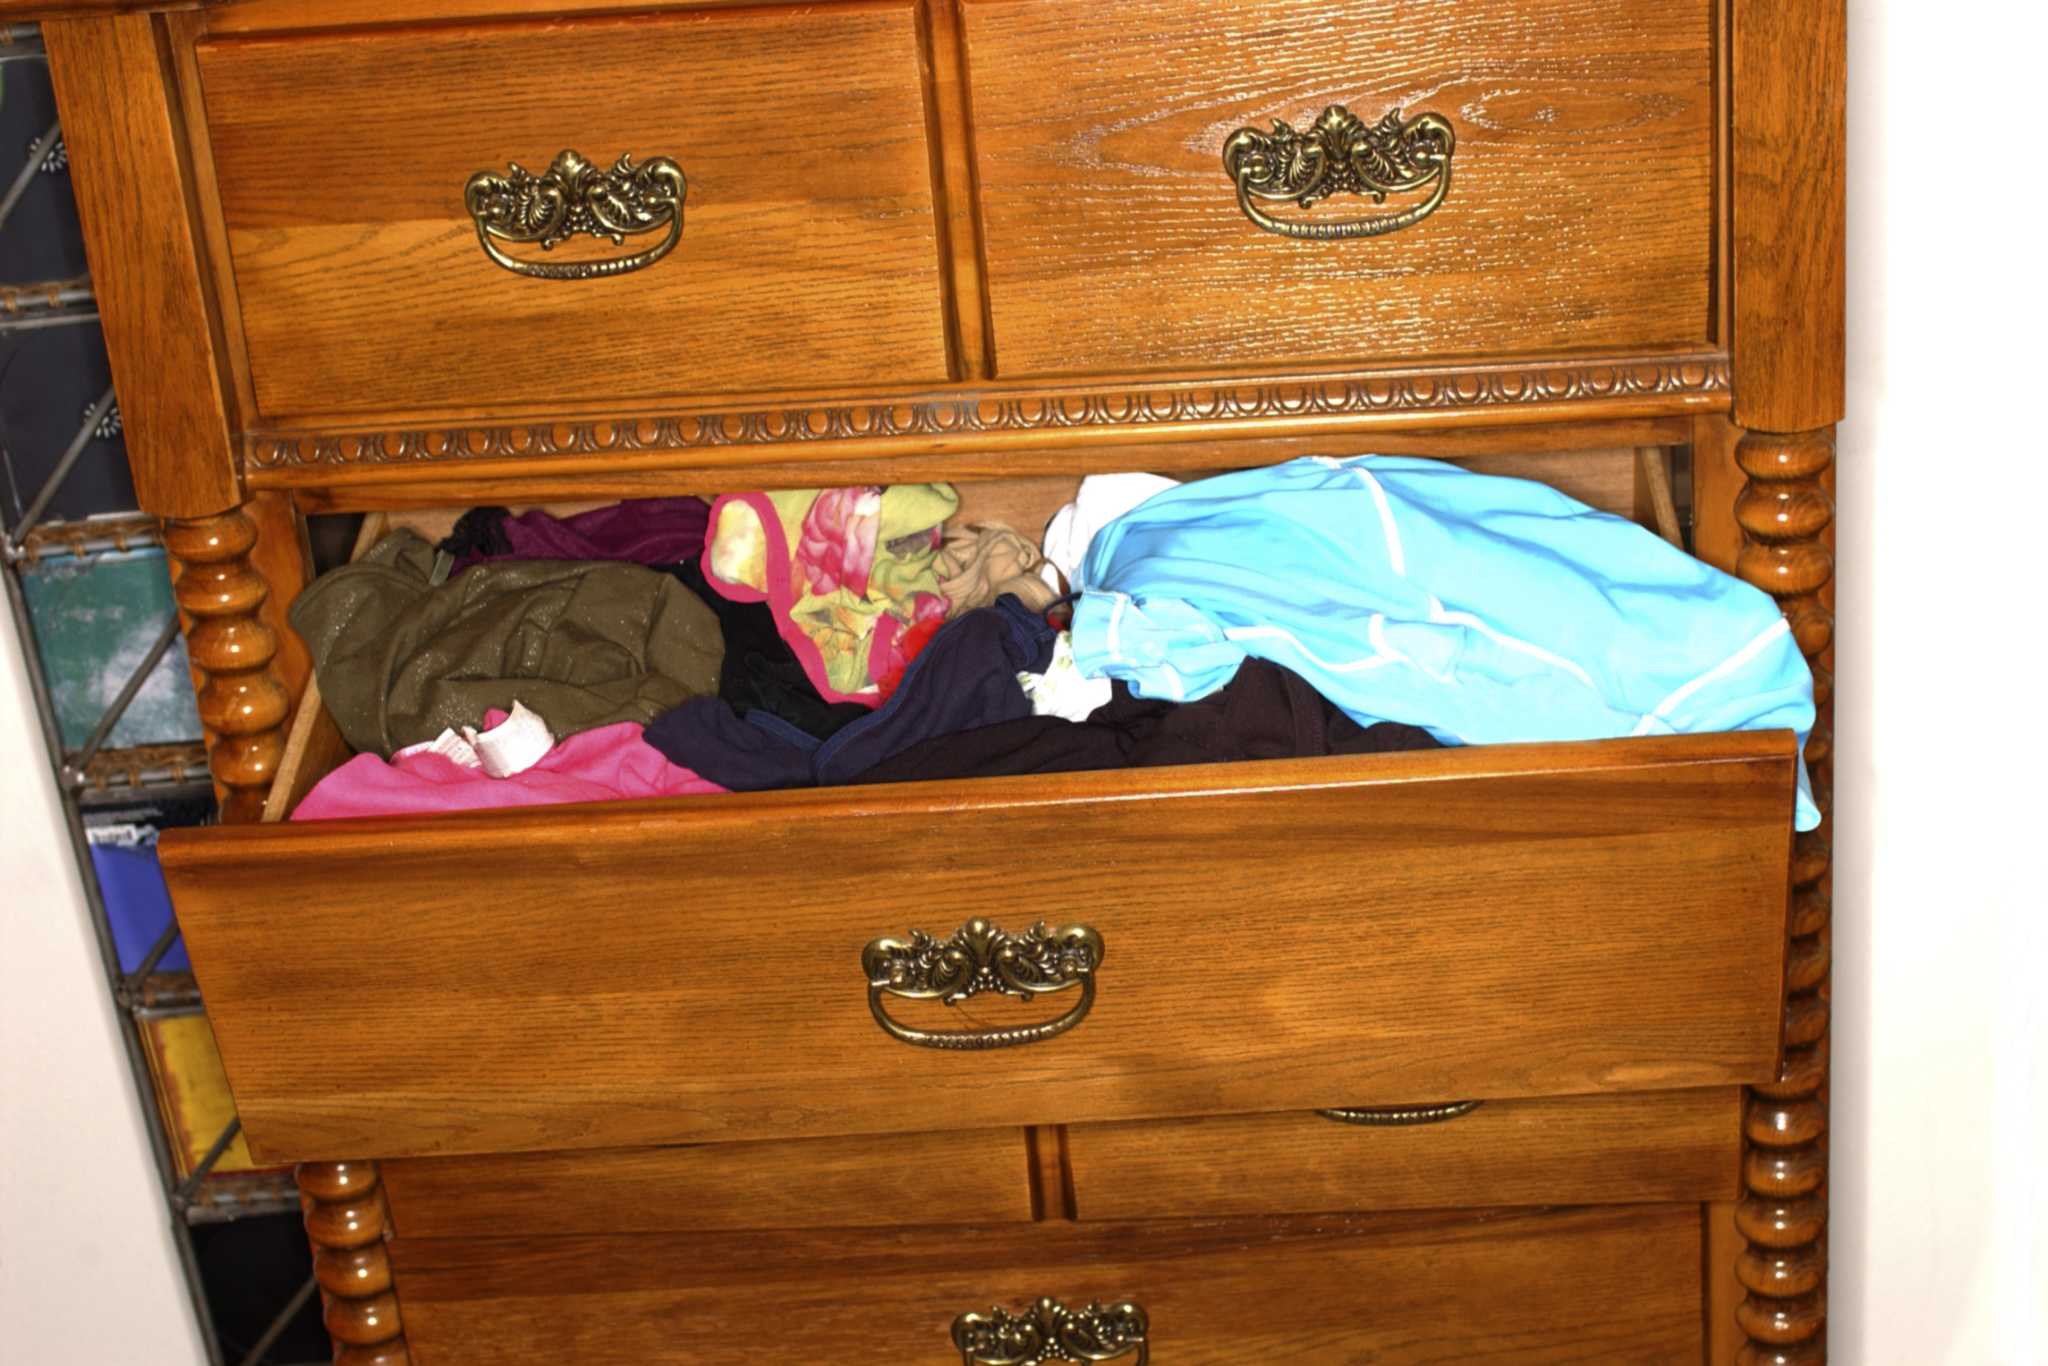 How to Prevent Drawers From Falling Out